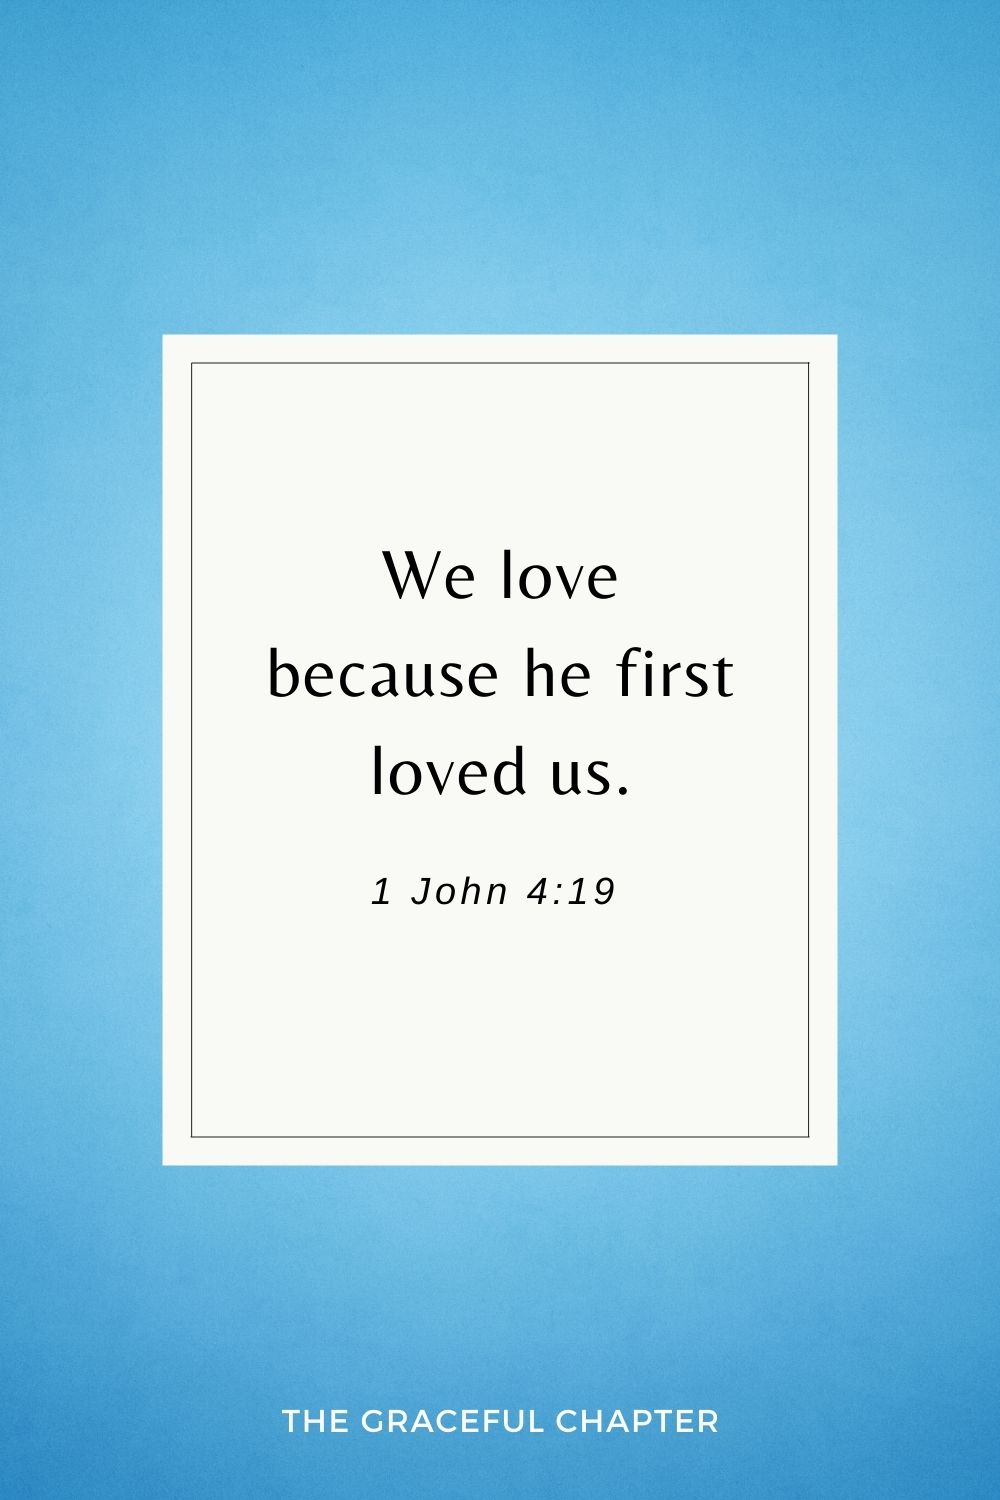 short bible verses about love-  We love because he first loved us. 1 John 4:19